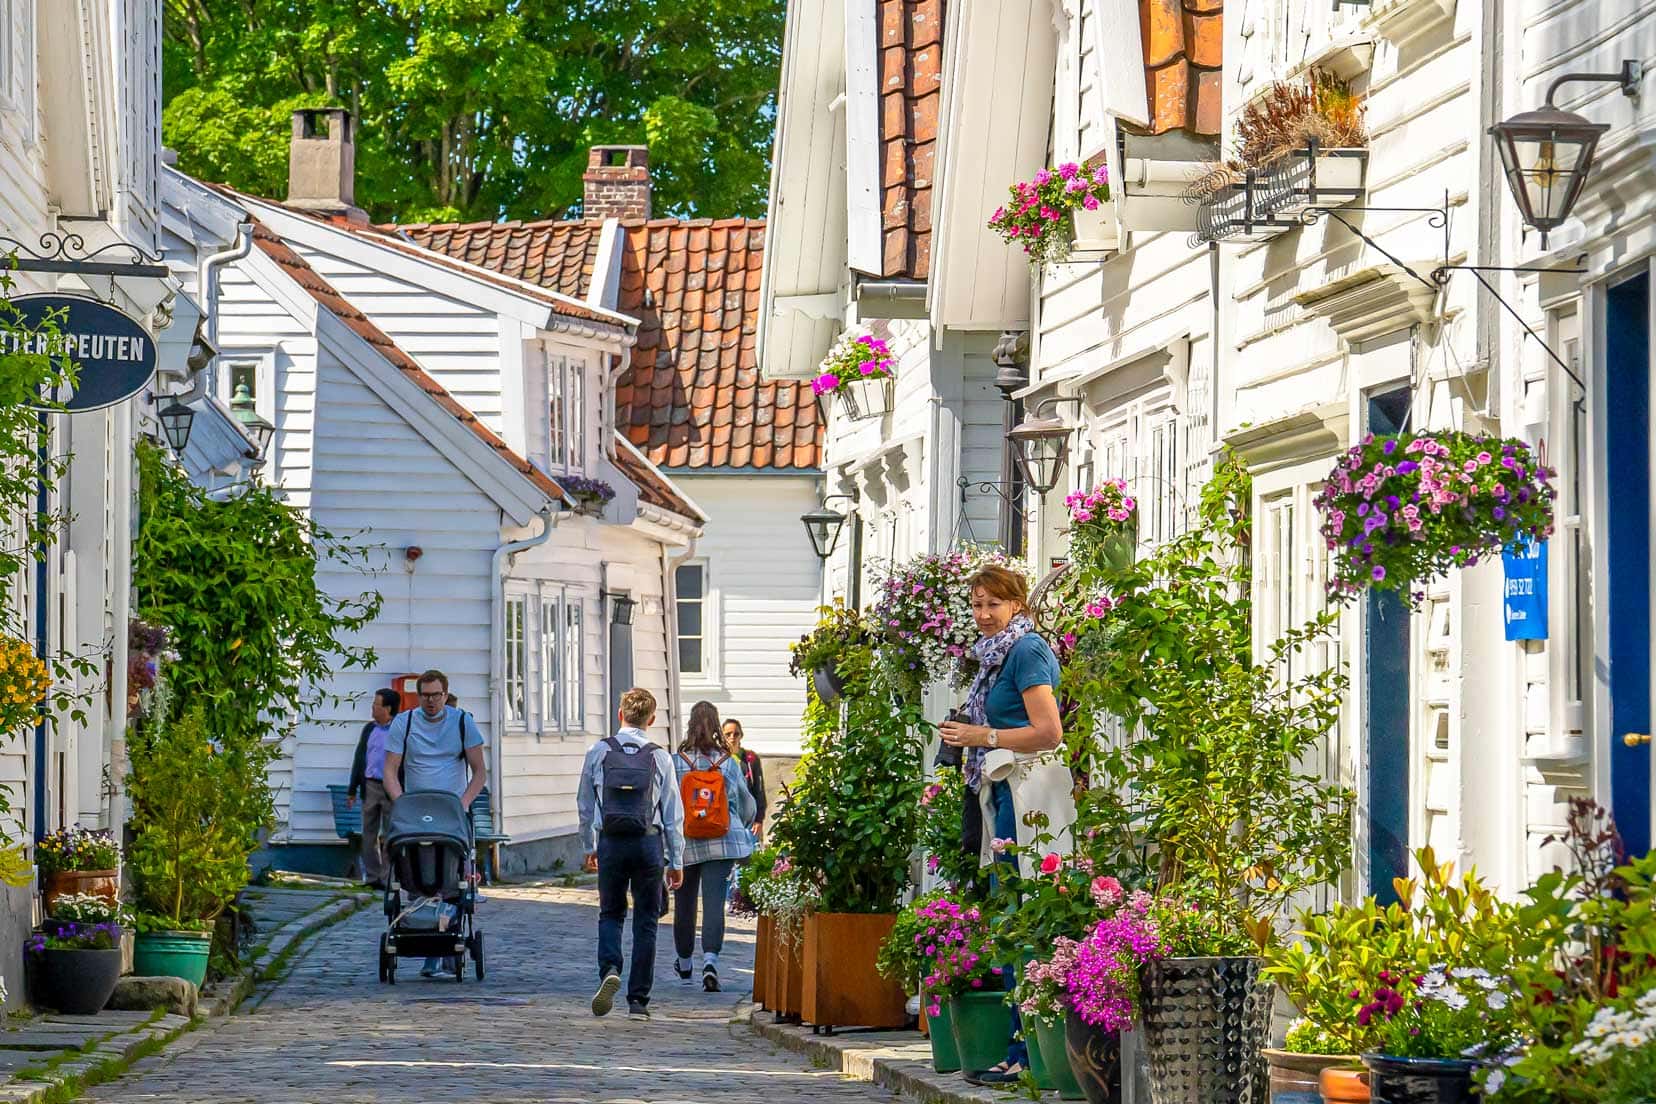 Shelley in Gamle Stavanger - white timber houses with greenery and flowers outsideand a few people walking through the narrow cobbled street